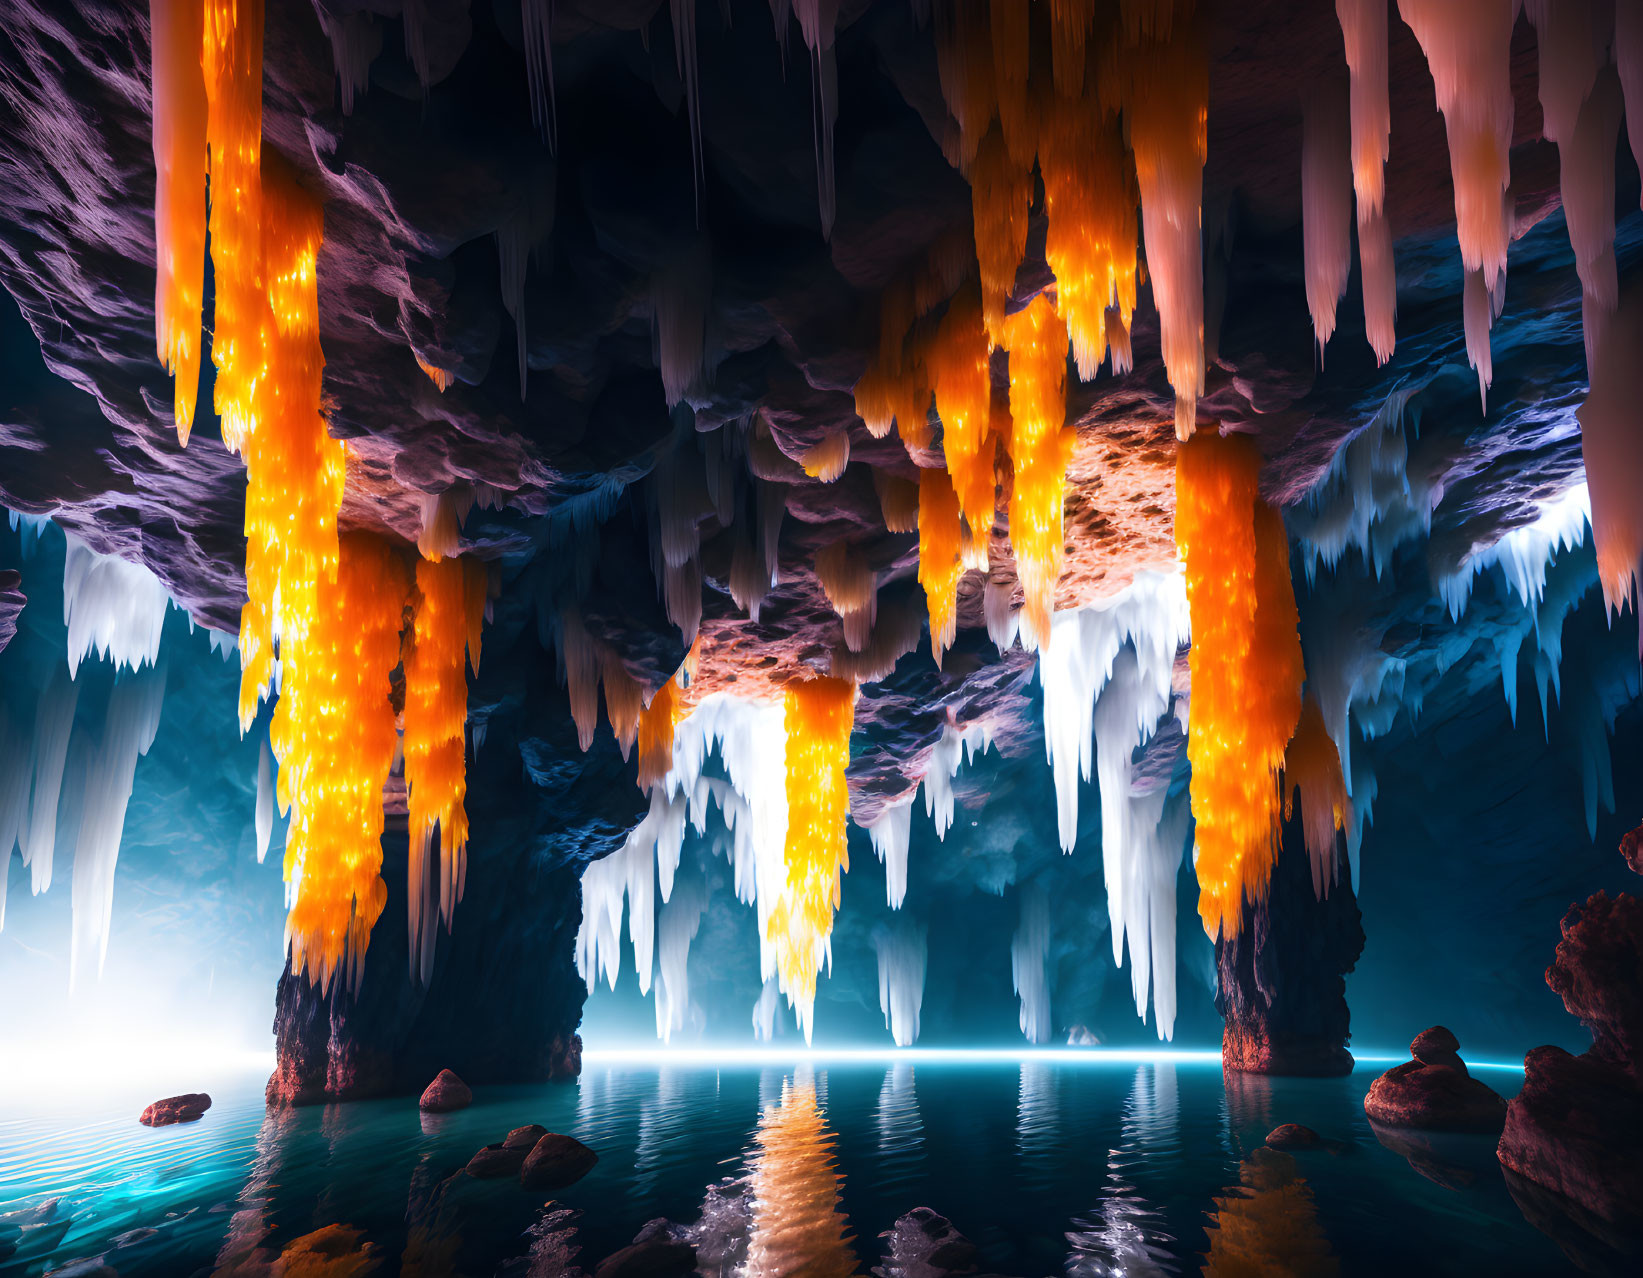 Mystical Cave with Glowing Stalactites and Icicle-like Formations